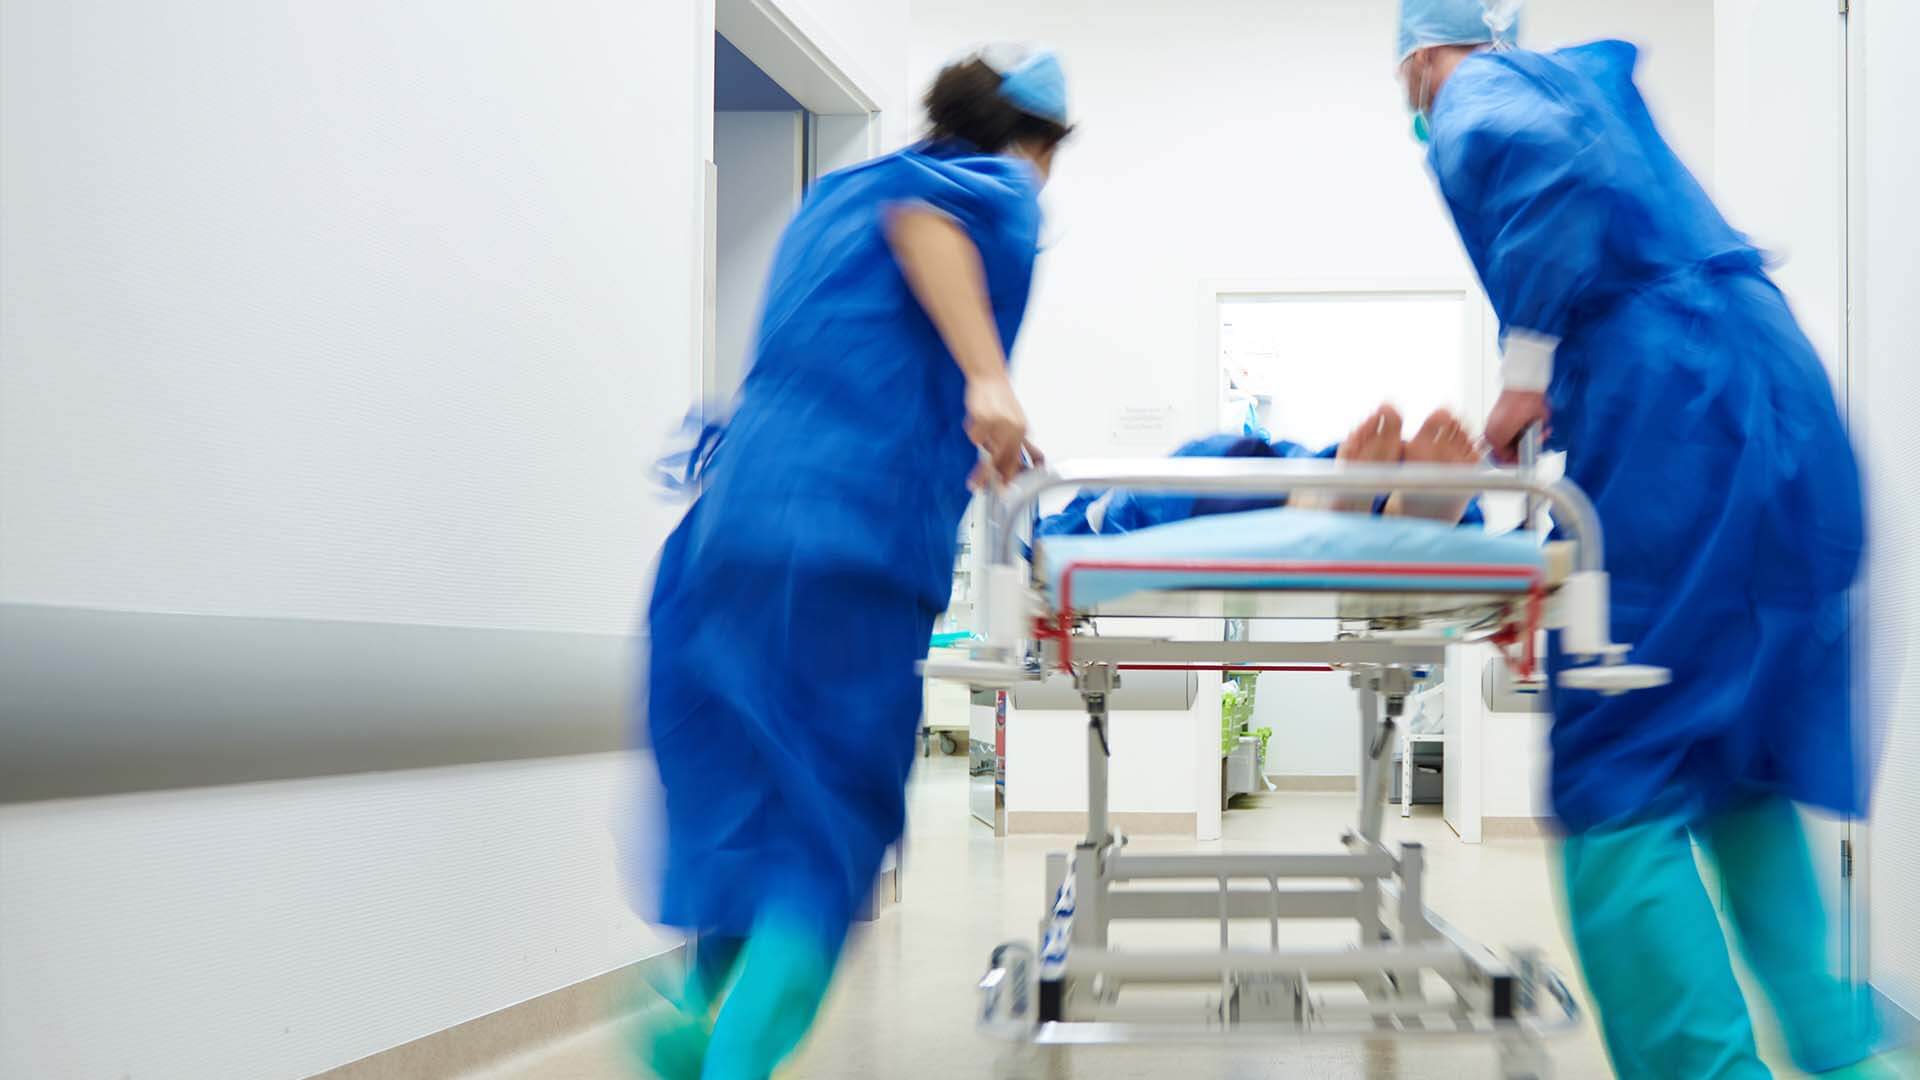 Doctors rushing a personal injury victim that has suffered a degloving injury on a stretcher into the emergency operating room